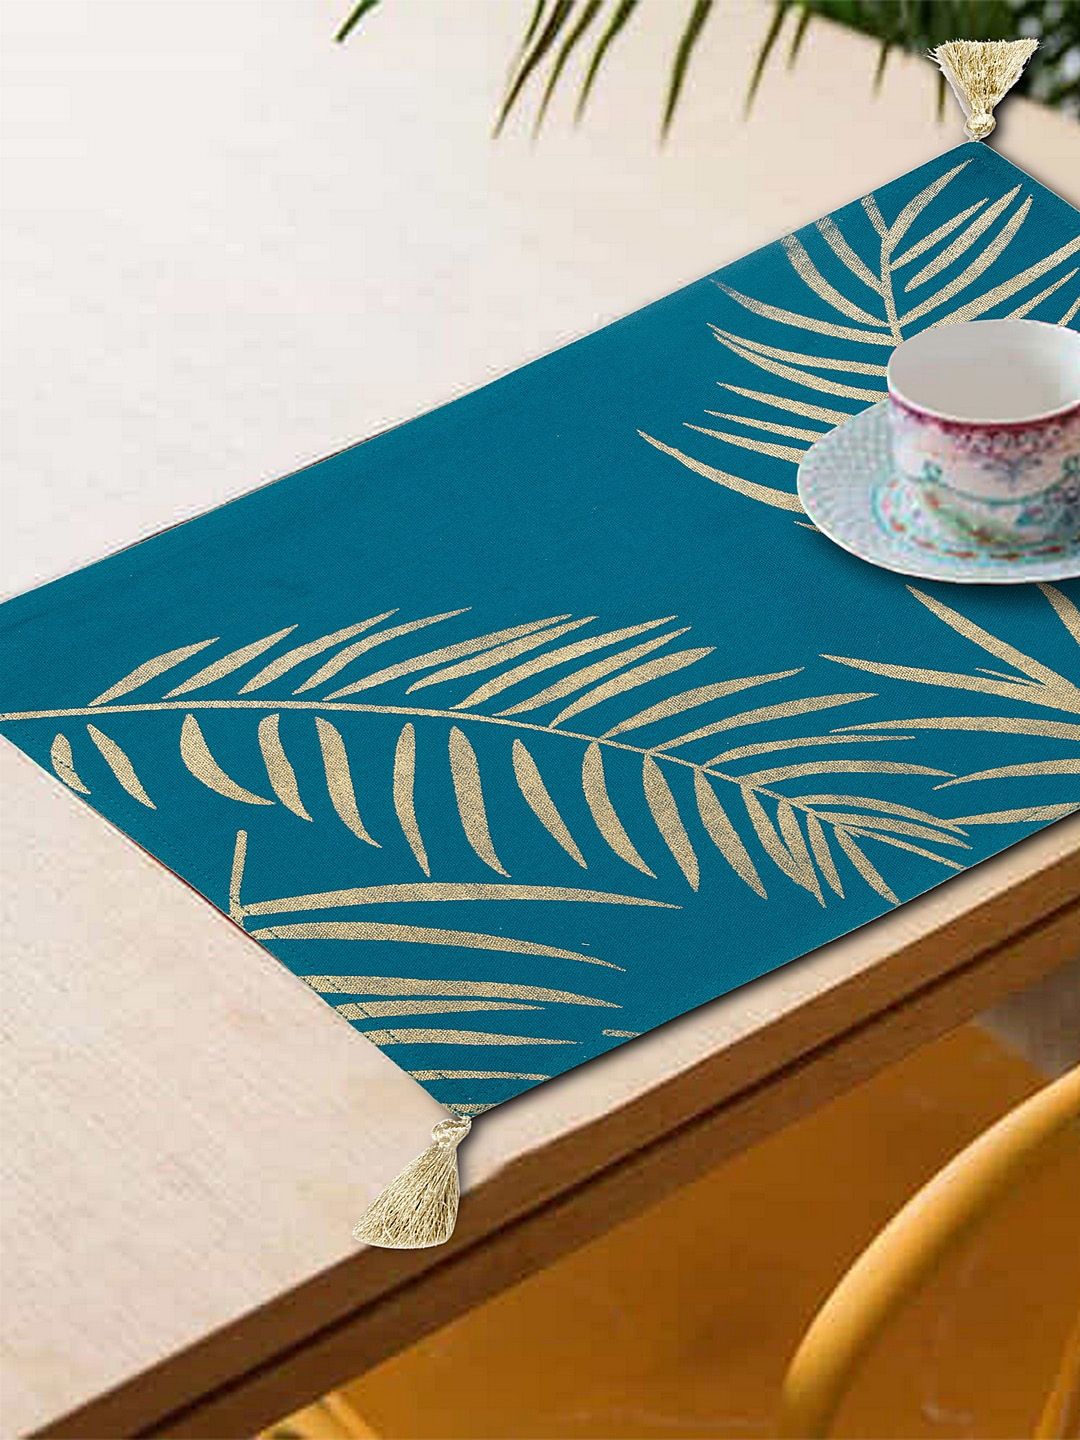 BLANC9 Set Of 8 Blue & Gold-Toned Foil Printed Table Placemats Price in India